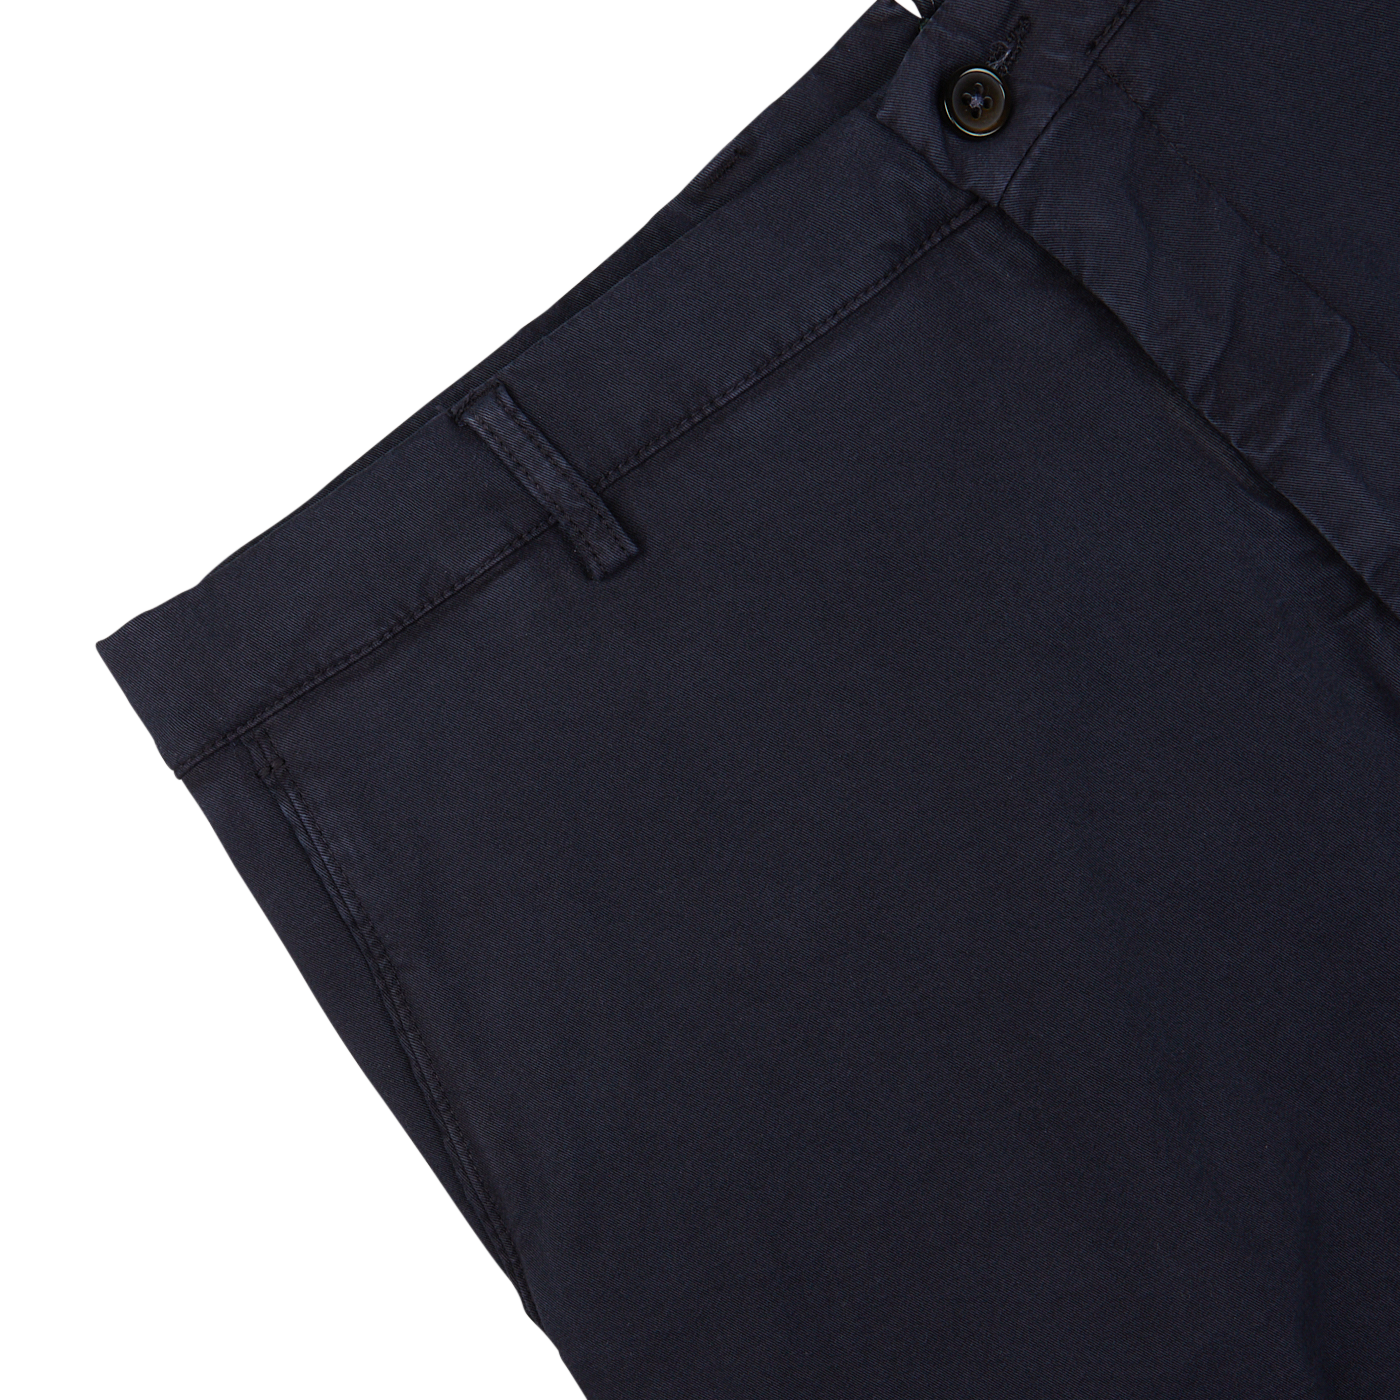 Part of a Berwich navy blue cotton stretch Bermuda shorts with a button closure and belt loop detail.